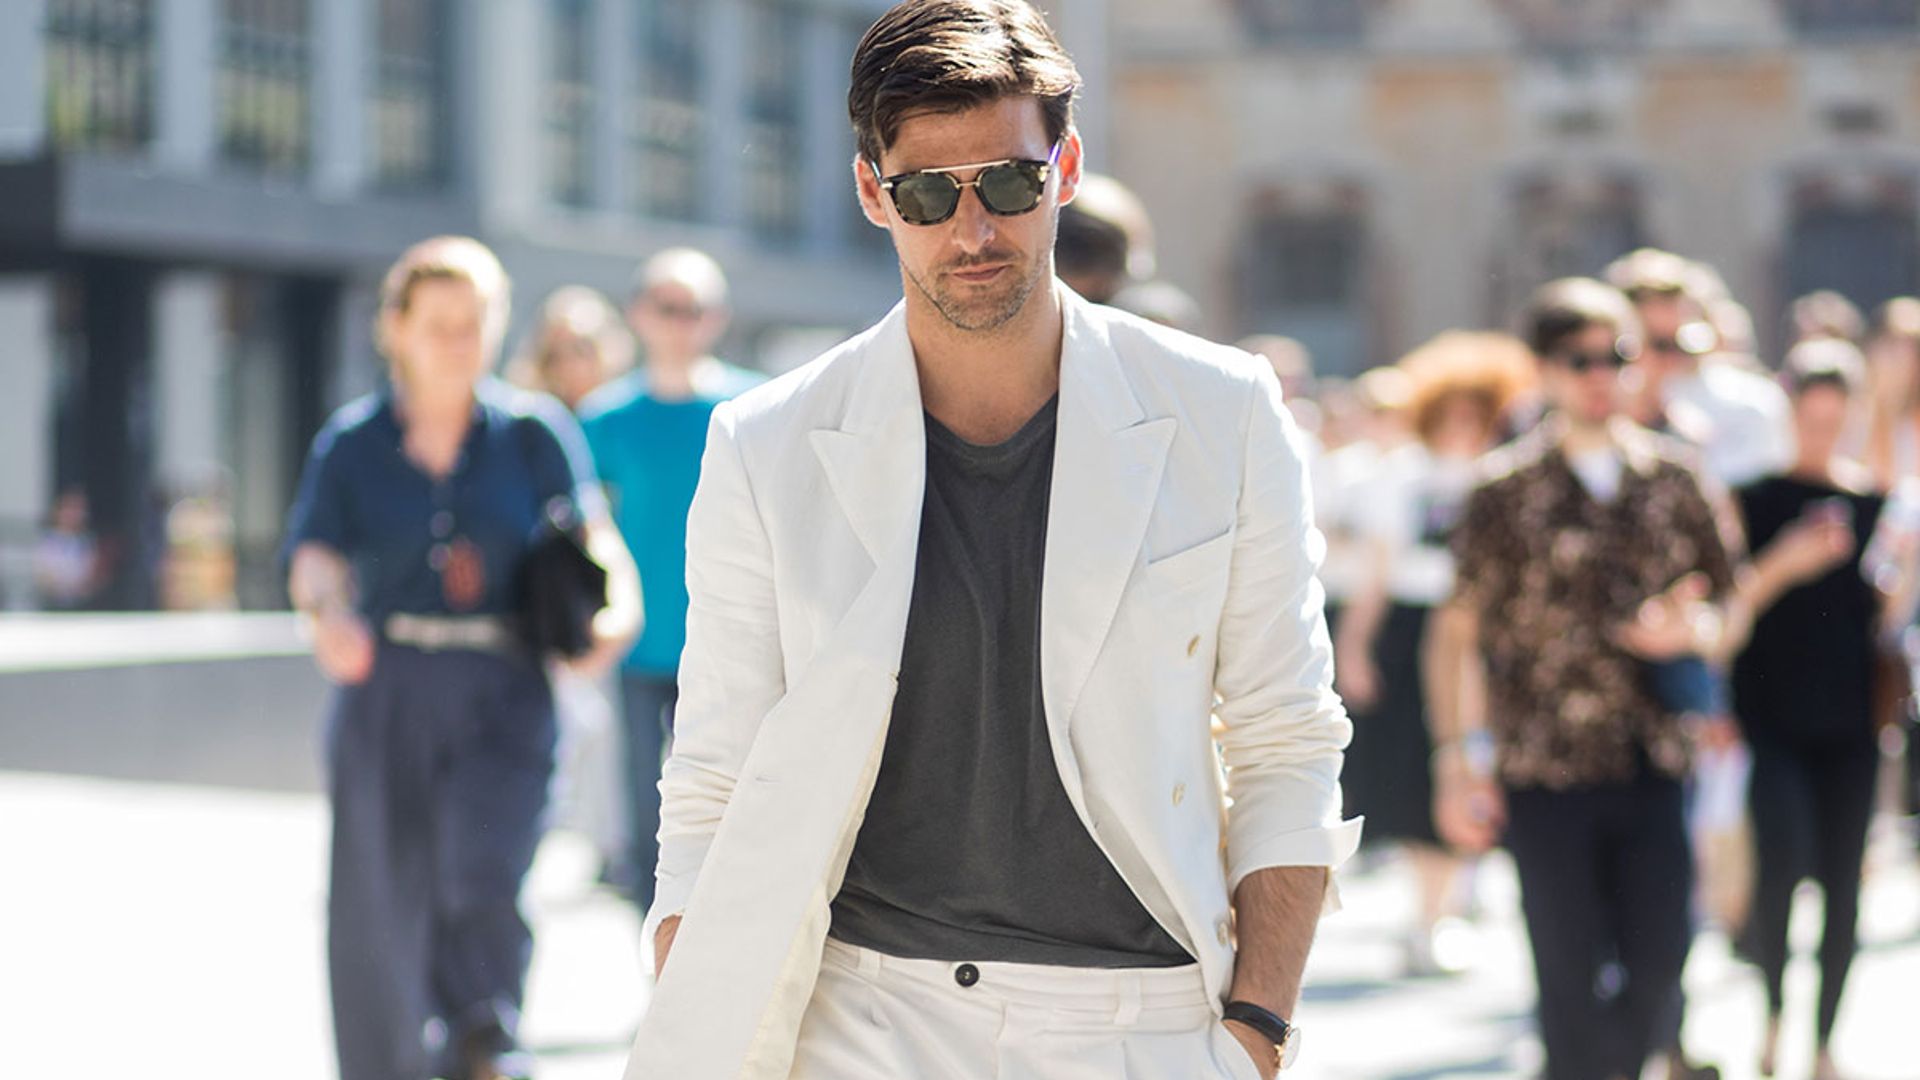 Spring Fashion Trends for Men: Versatility, Comfort, and Sustainability